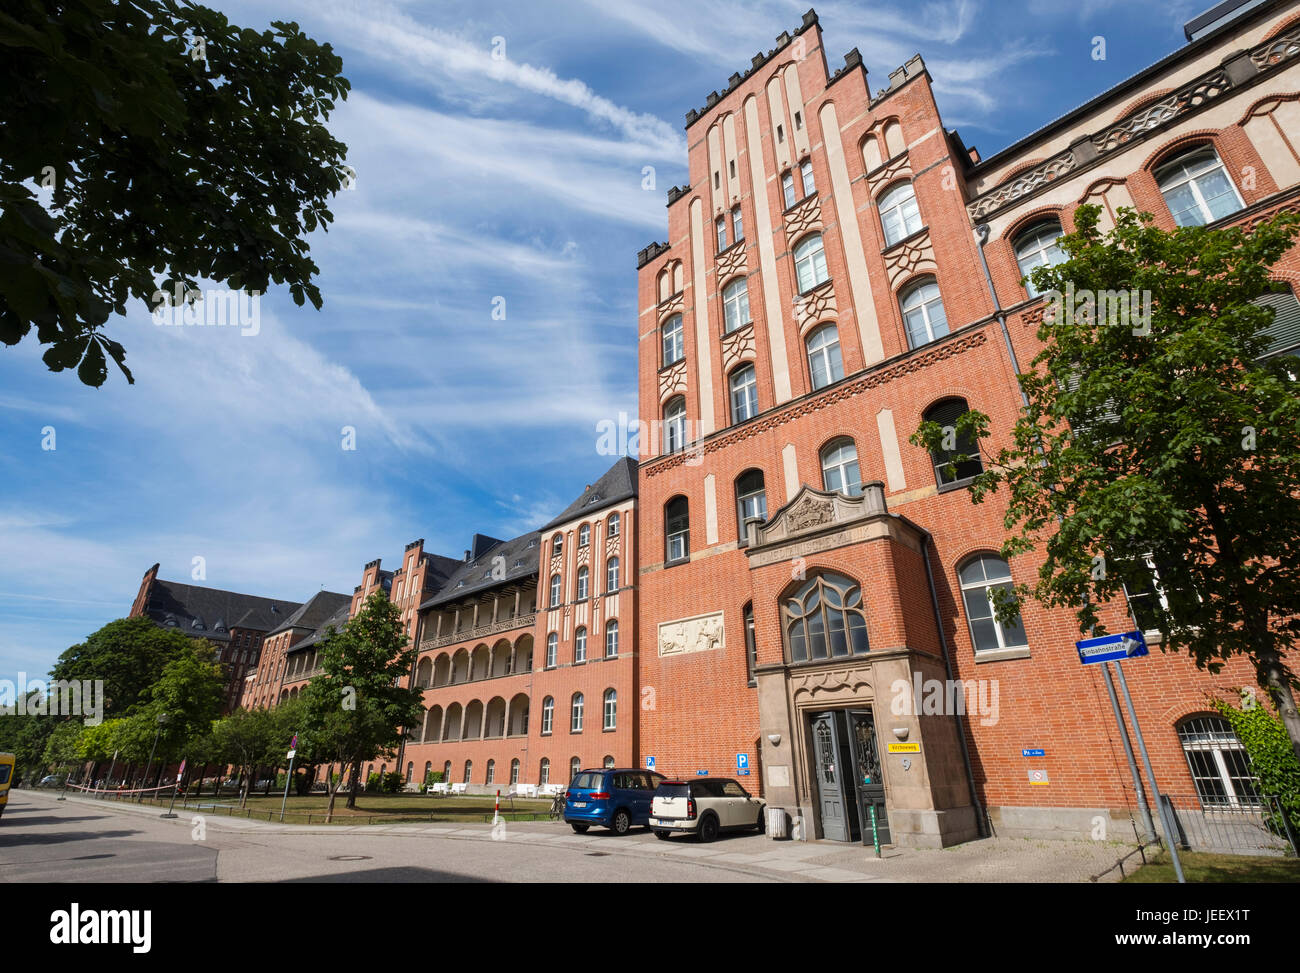 Exterior of Charite Hospital in Mitte, Berlin, Germany Stock Photo